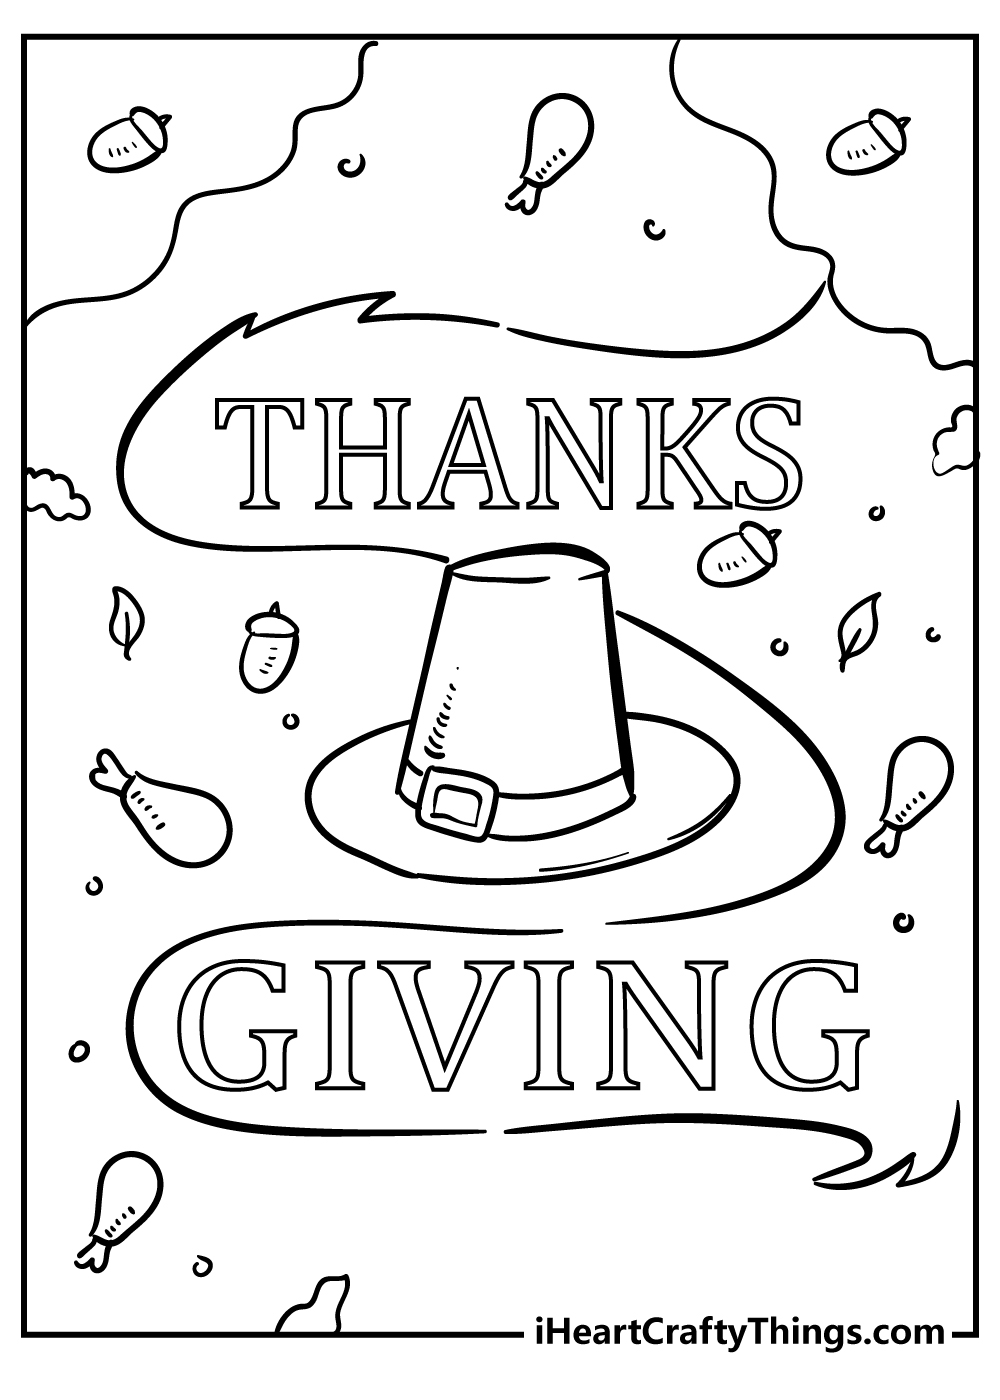 Thanksgiving Coloring Pages free printable